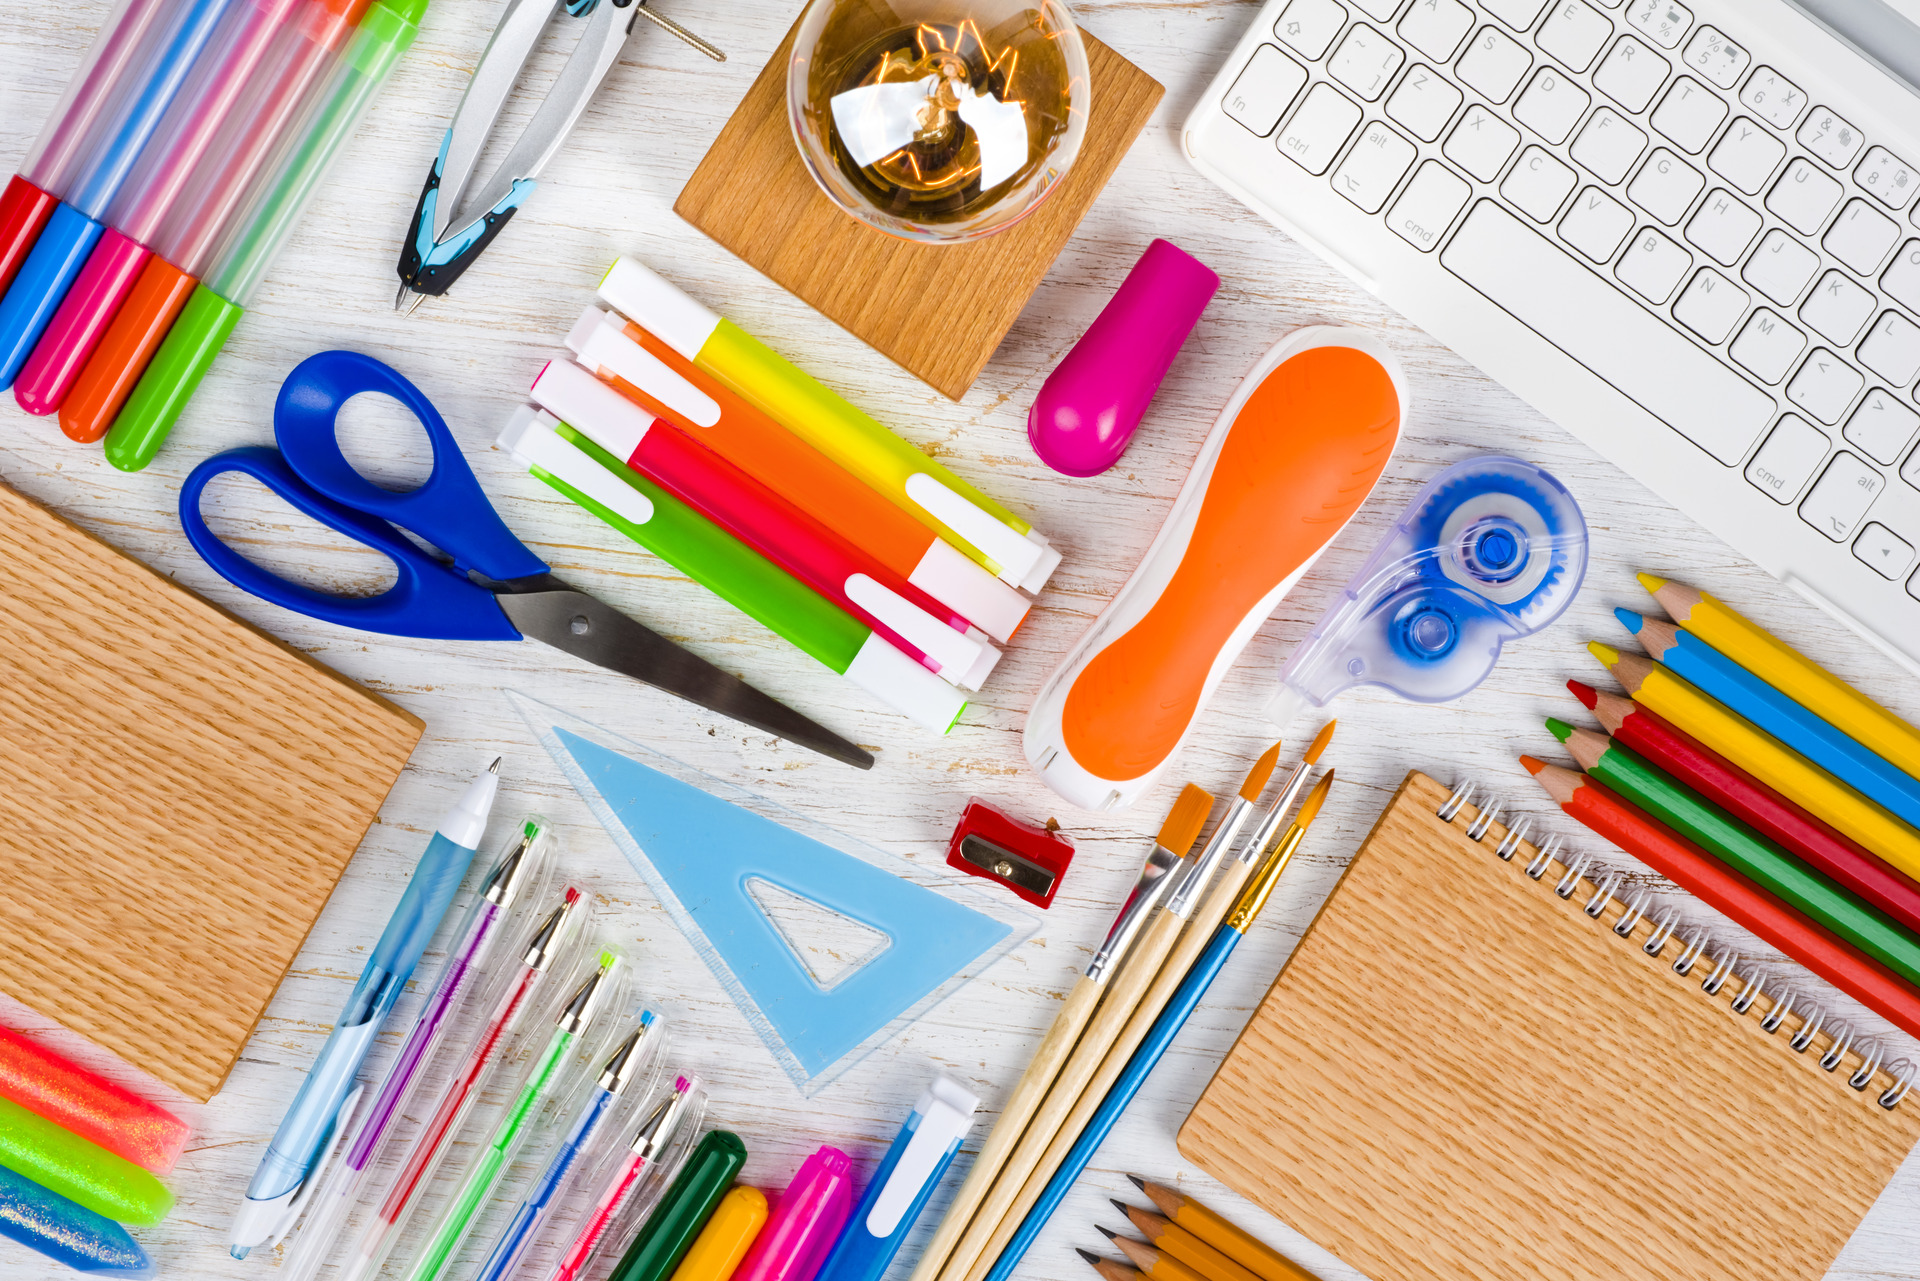 Above view of school and office supplies on wooden table